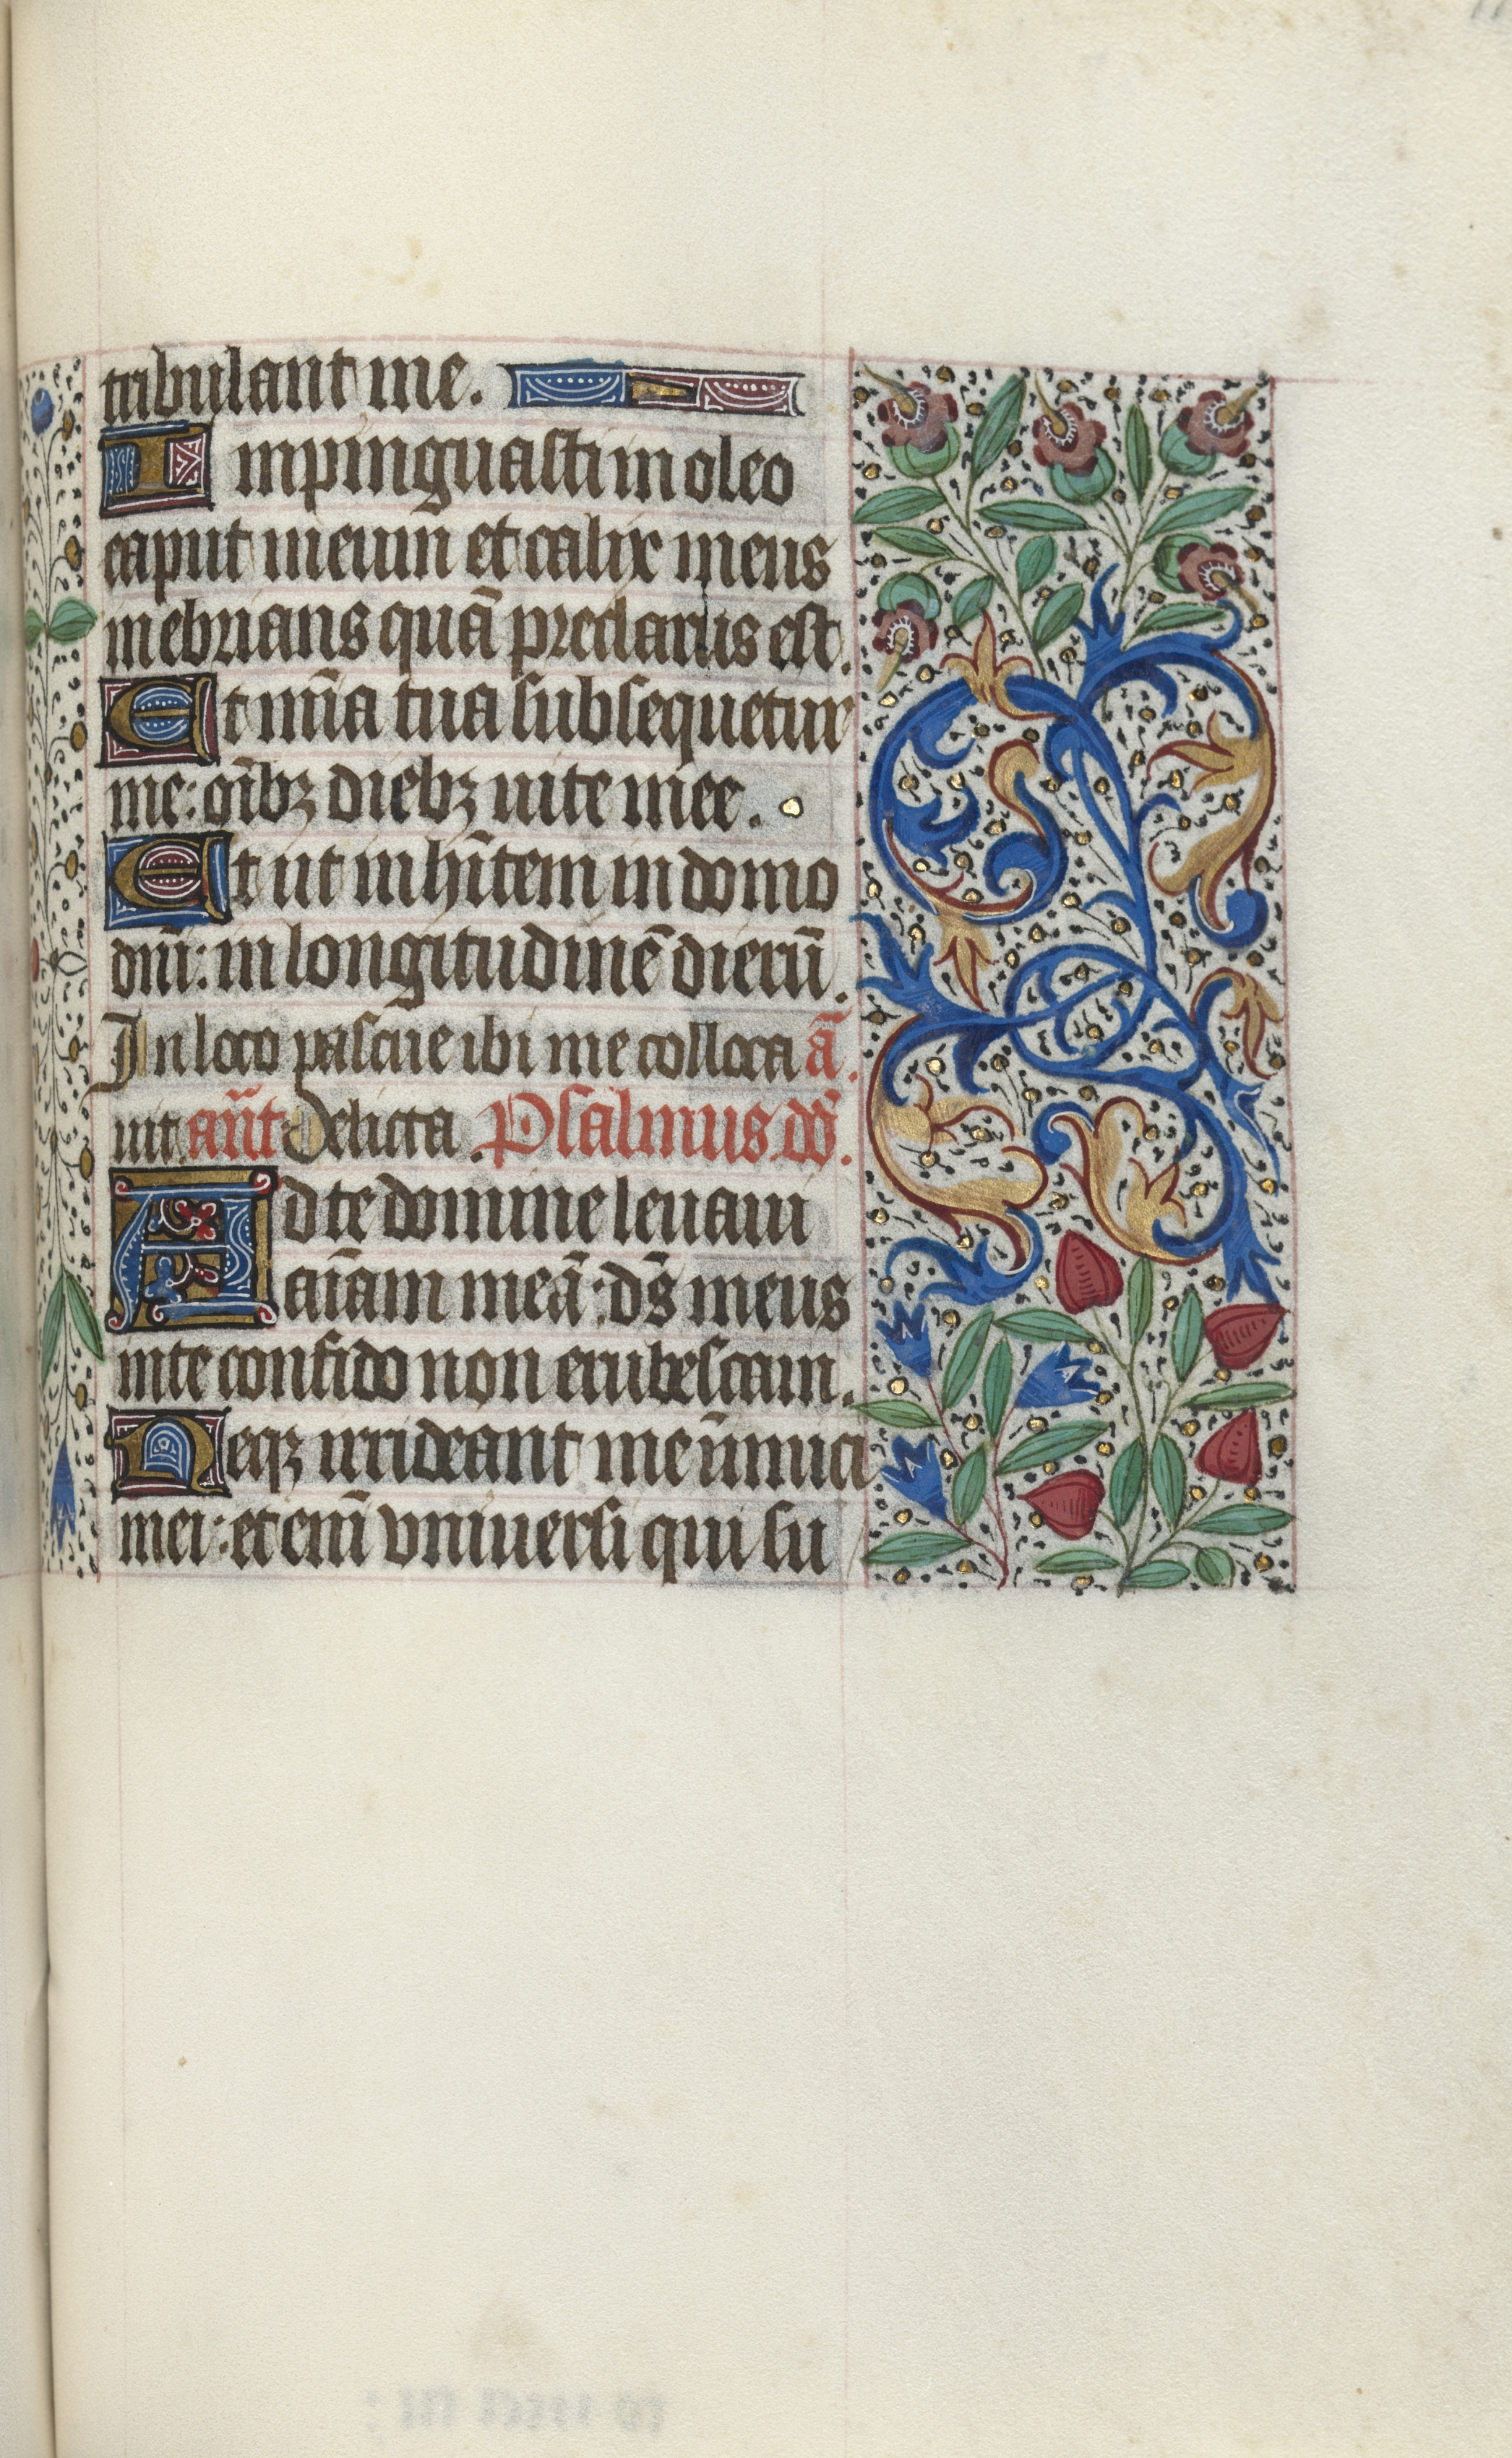 Book of Hours (Use of Rouen): fol. 118r